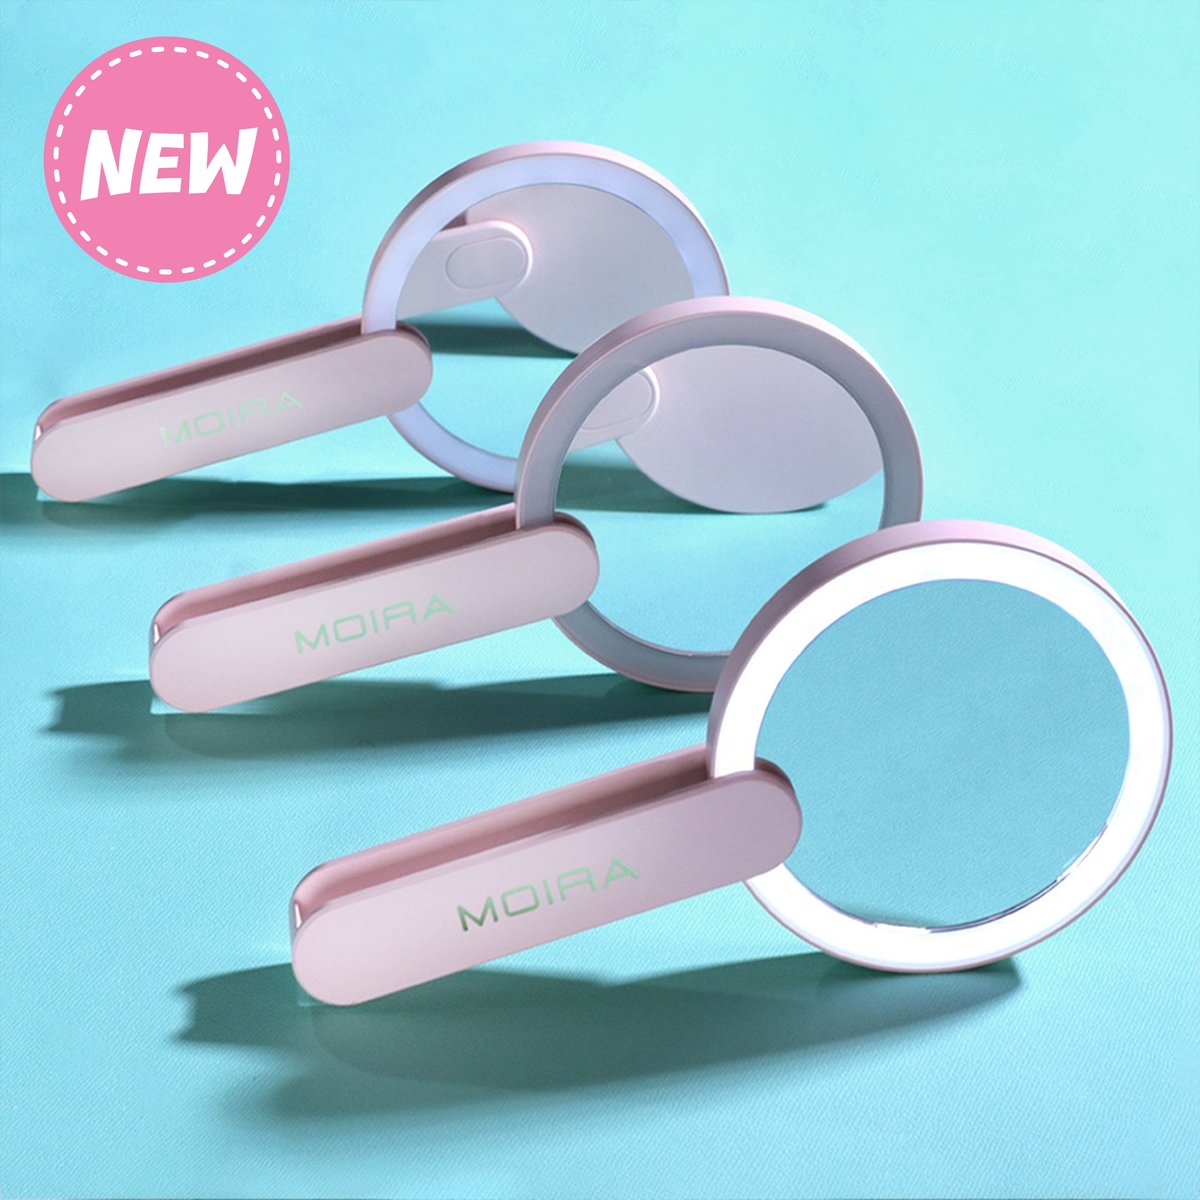 LED HAND COMPACT MIRROR